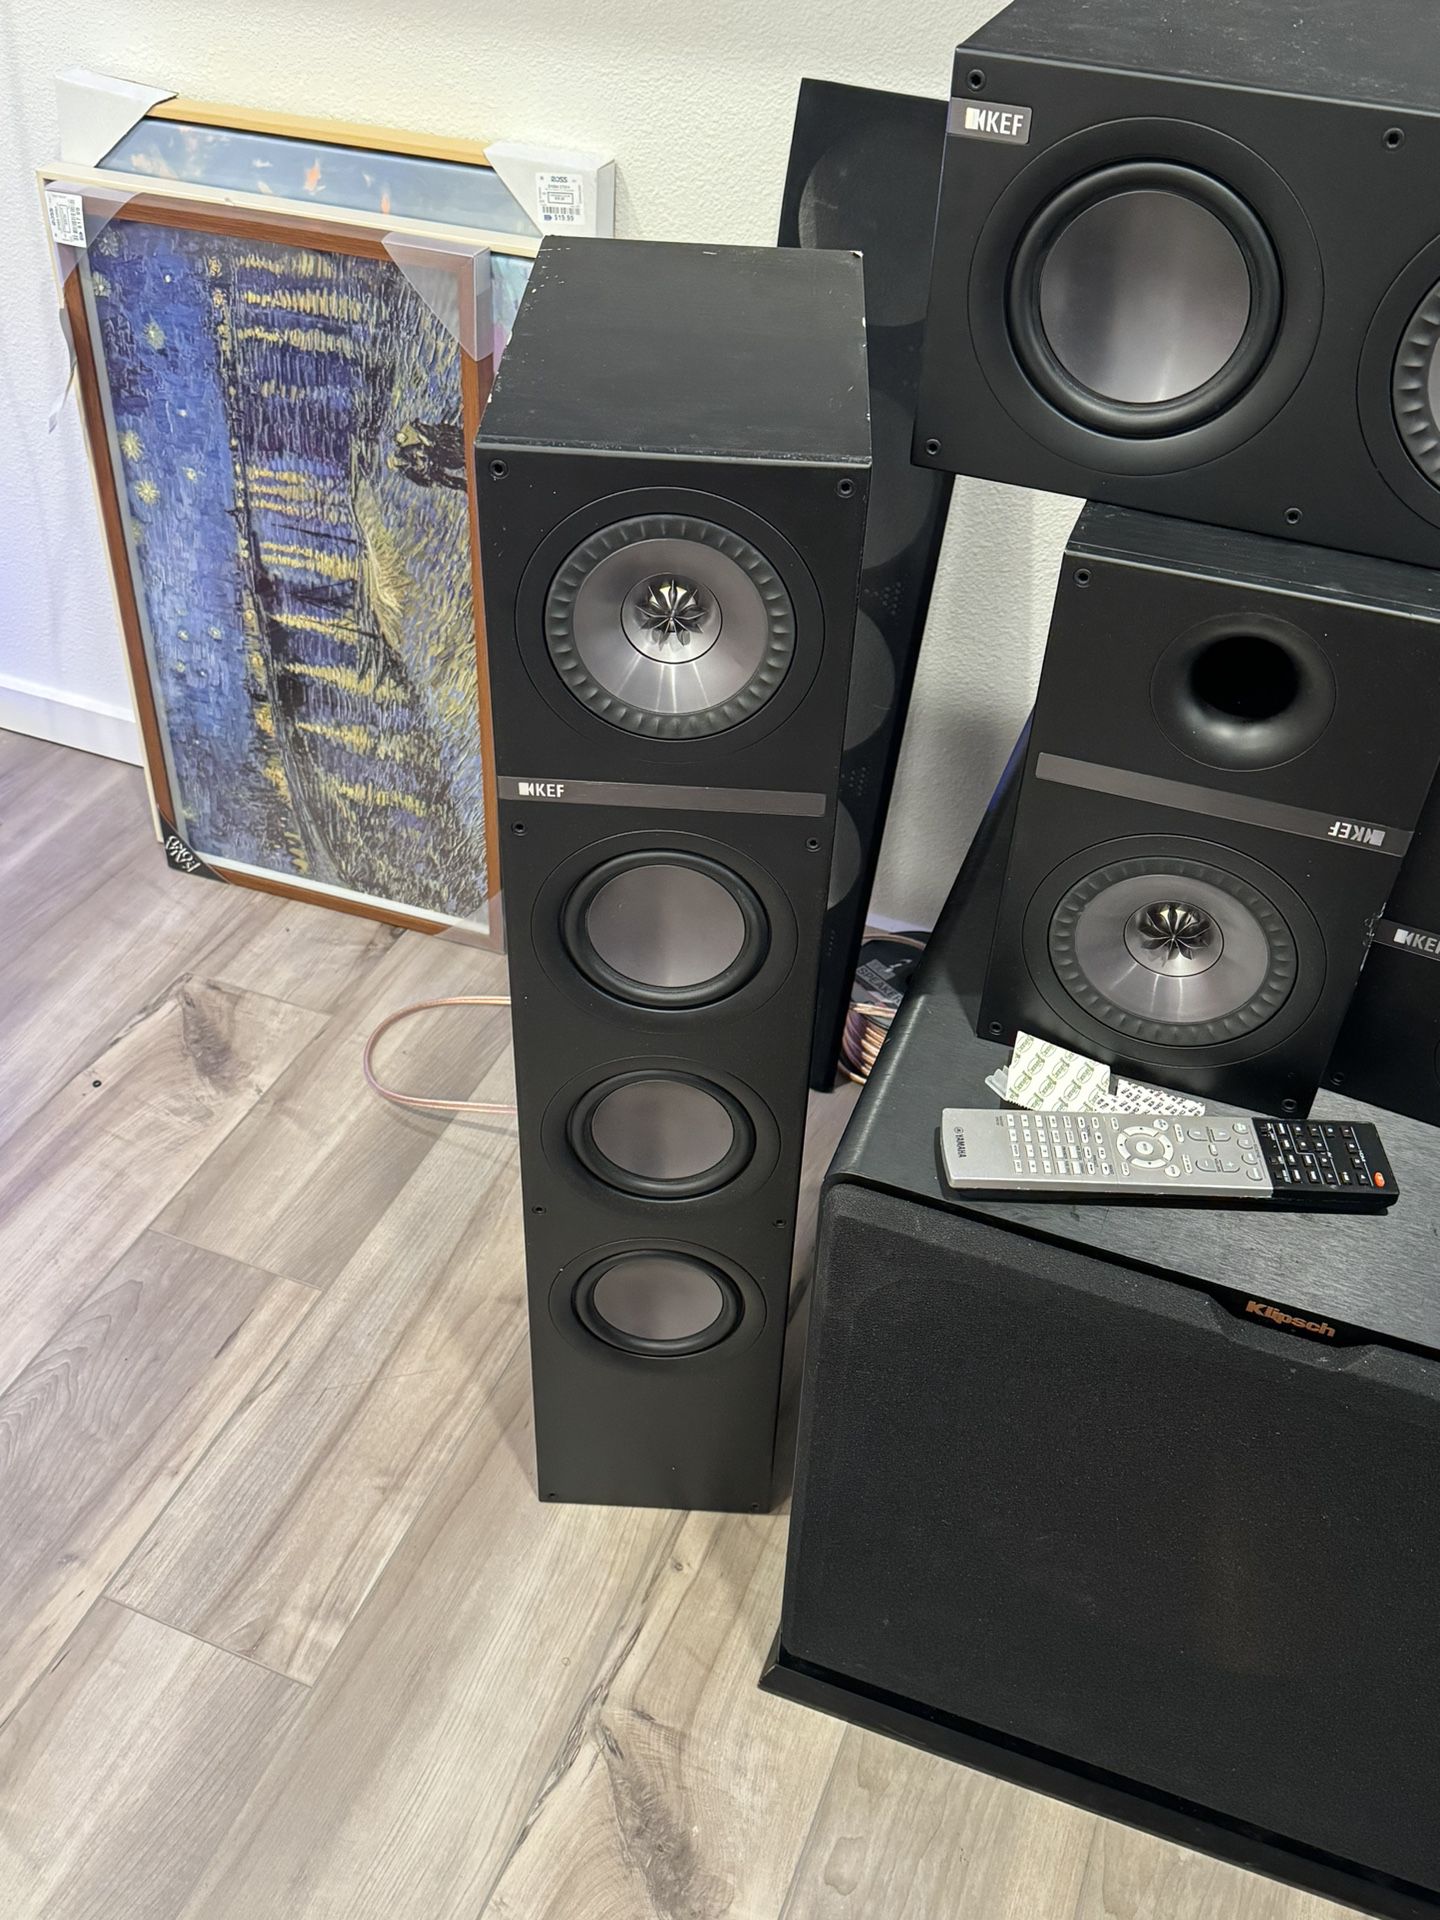 Kef home theater system